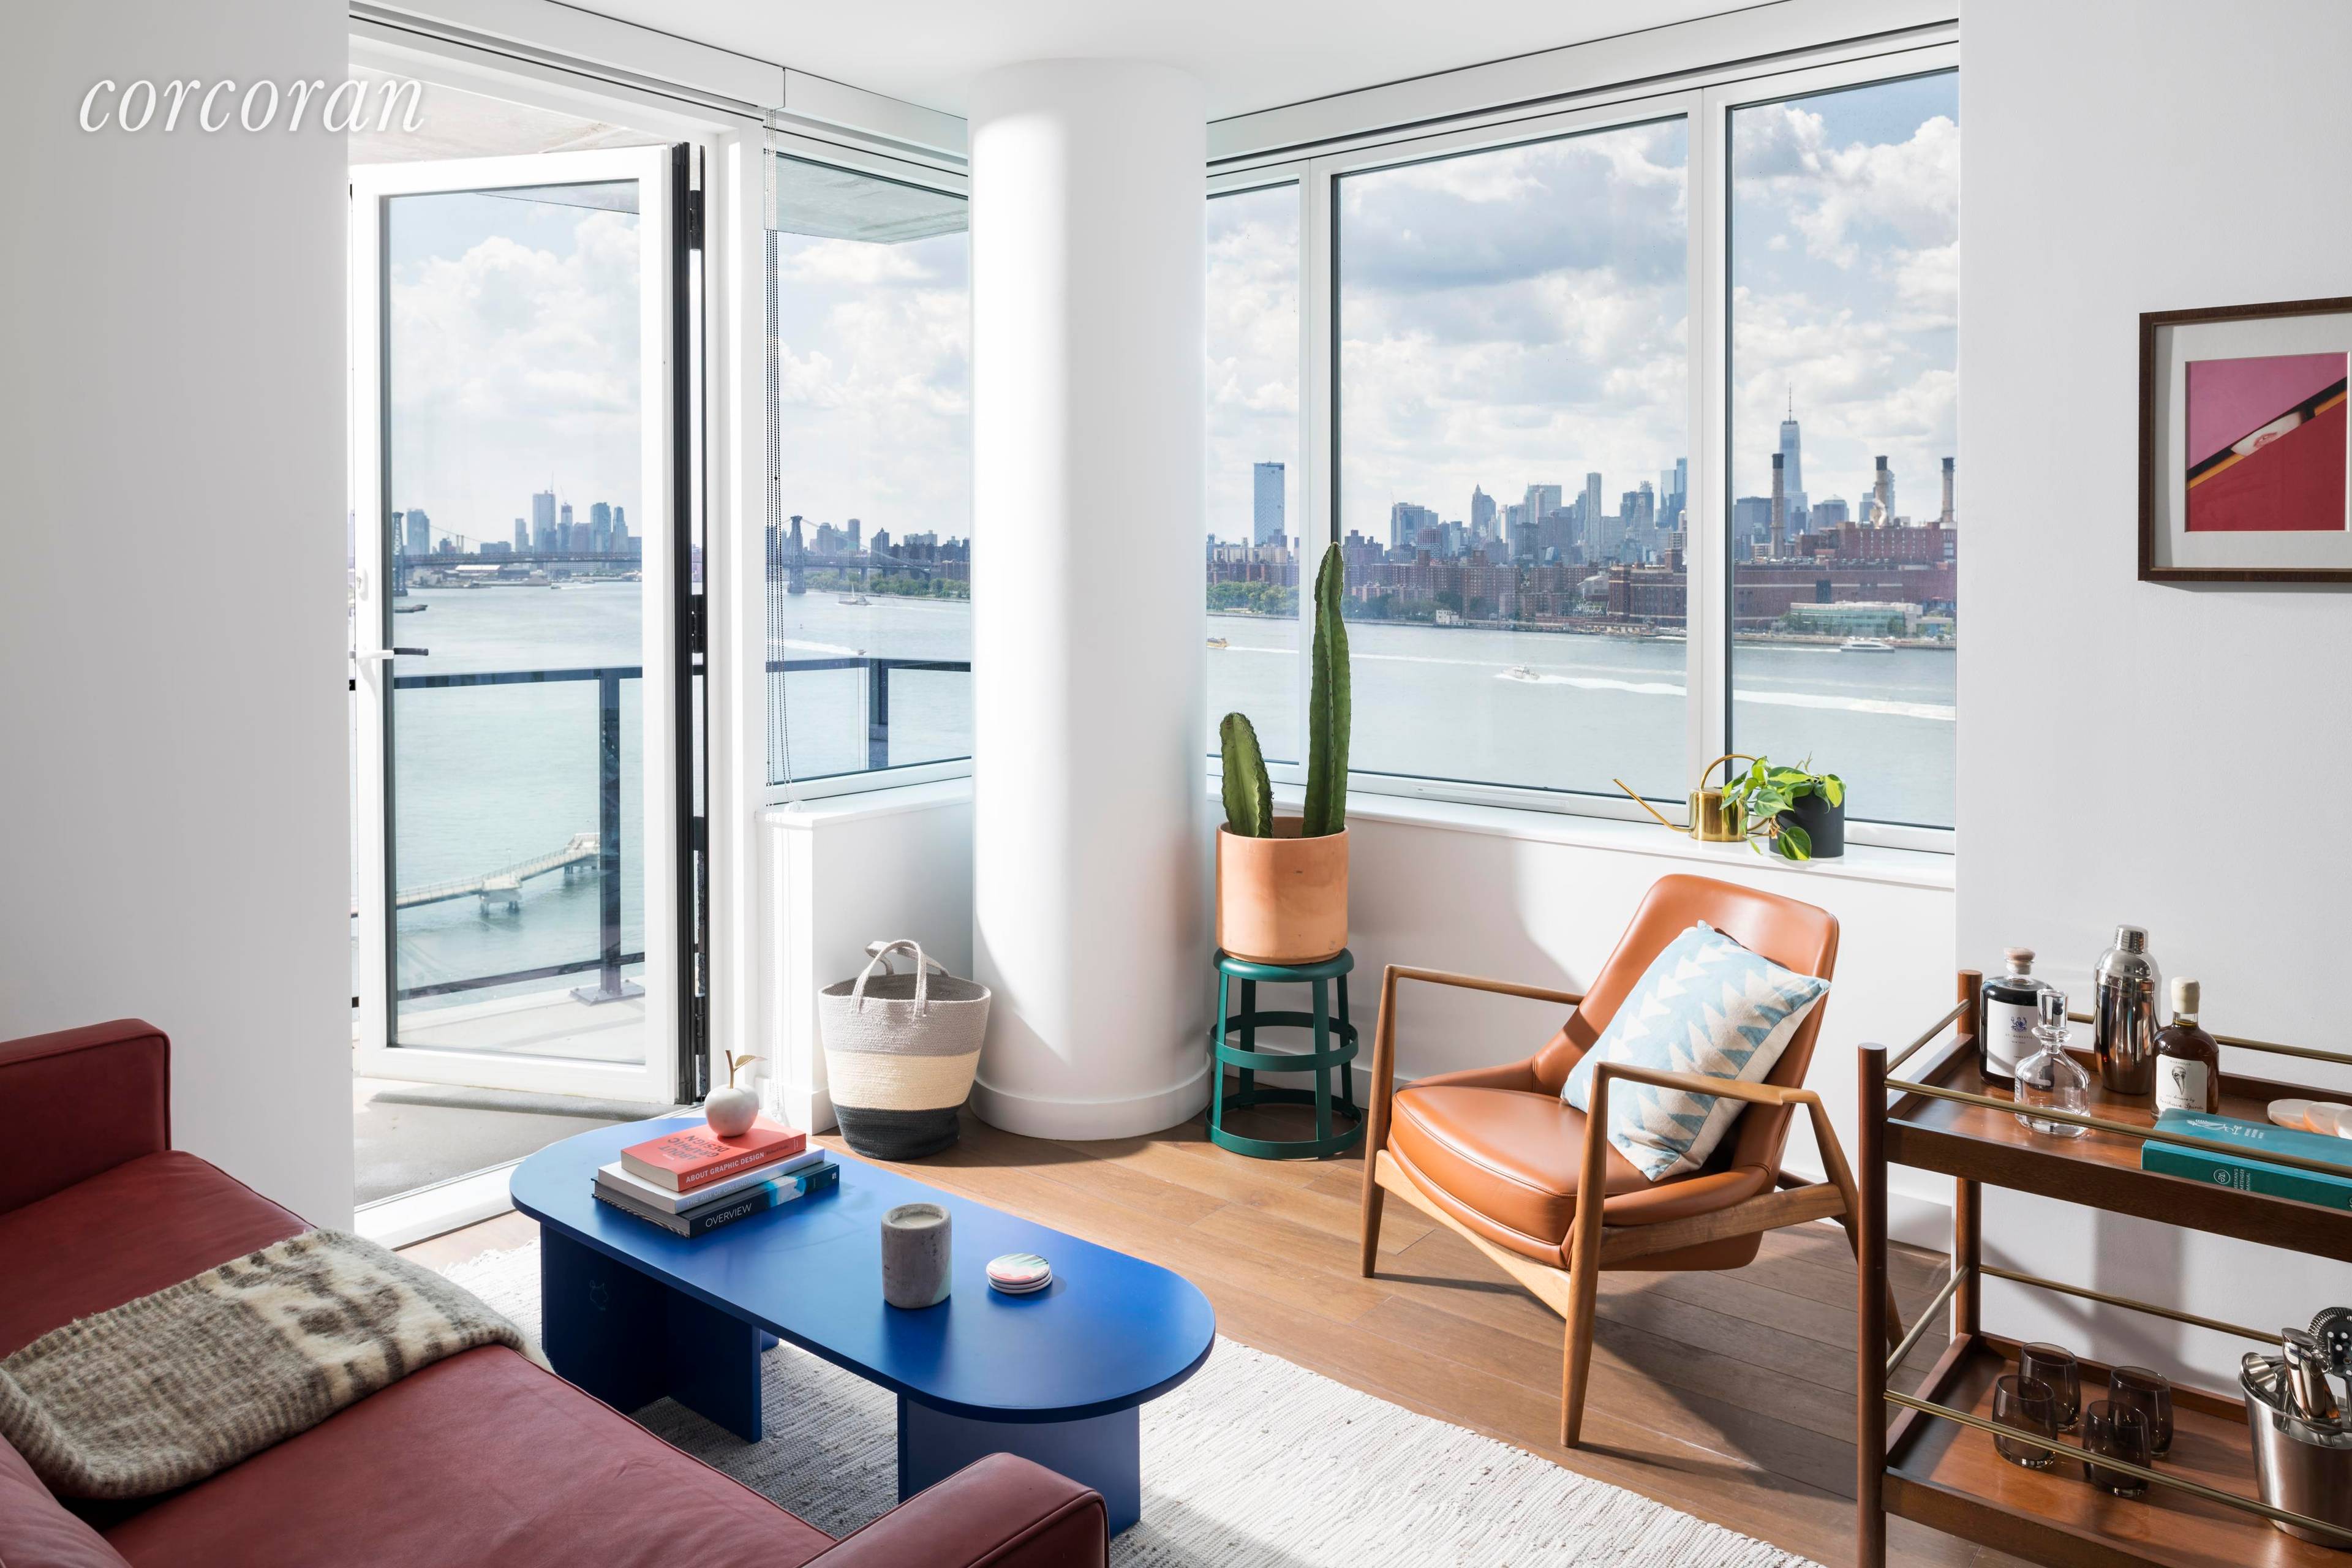 Offering 3 months free on a 15 month leaseThis southeast facing 1BR residence features ample light and outdoor space with oversized windows allowing for openness unmatched throughout its incredible Brooklyn ...